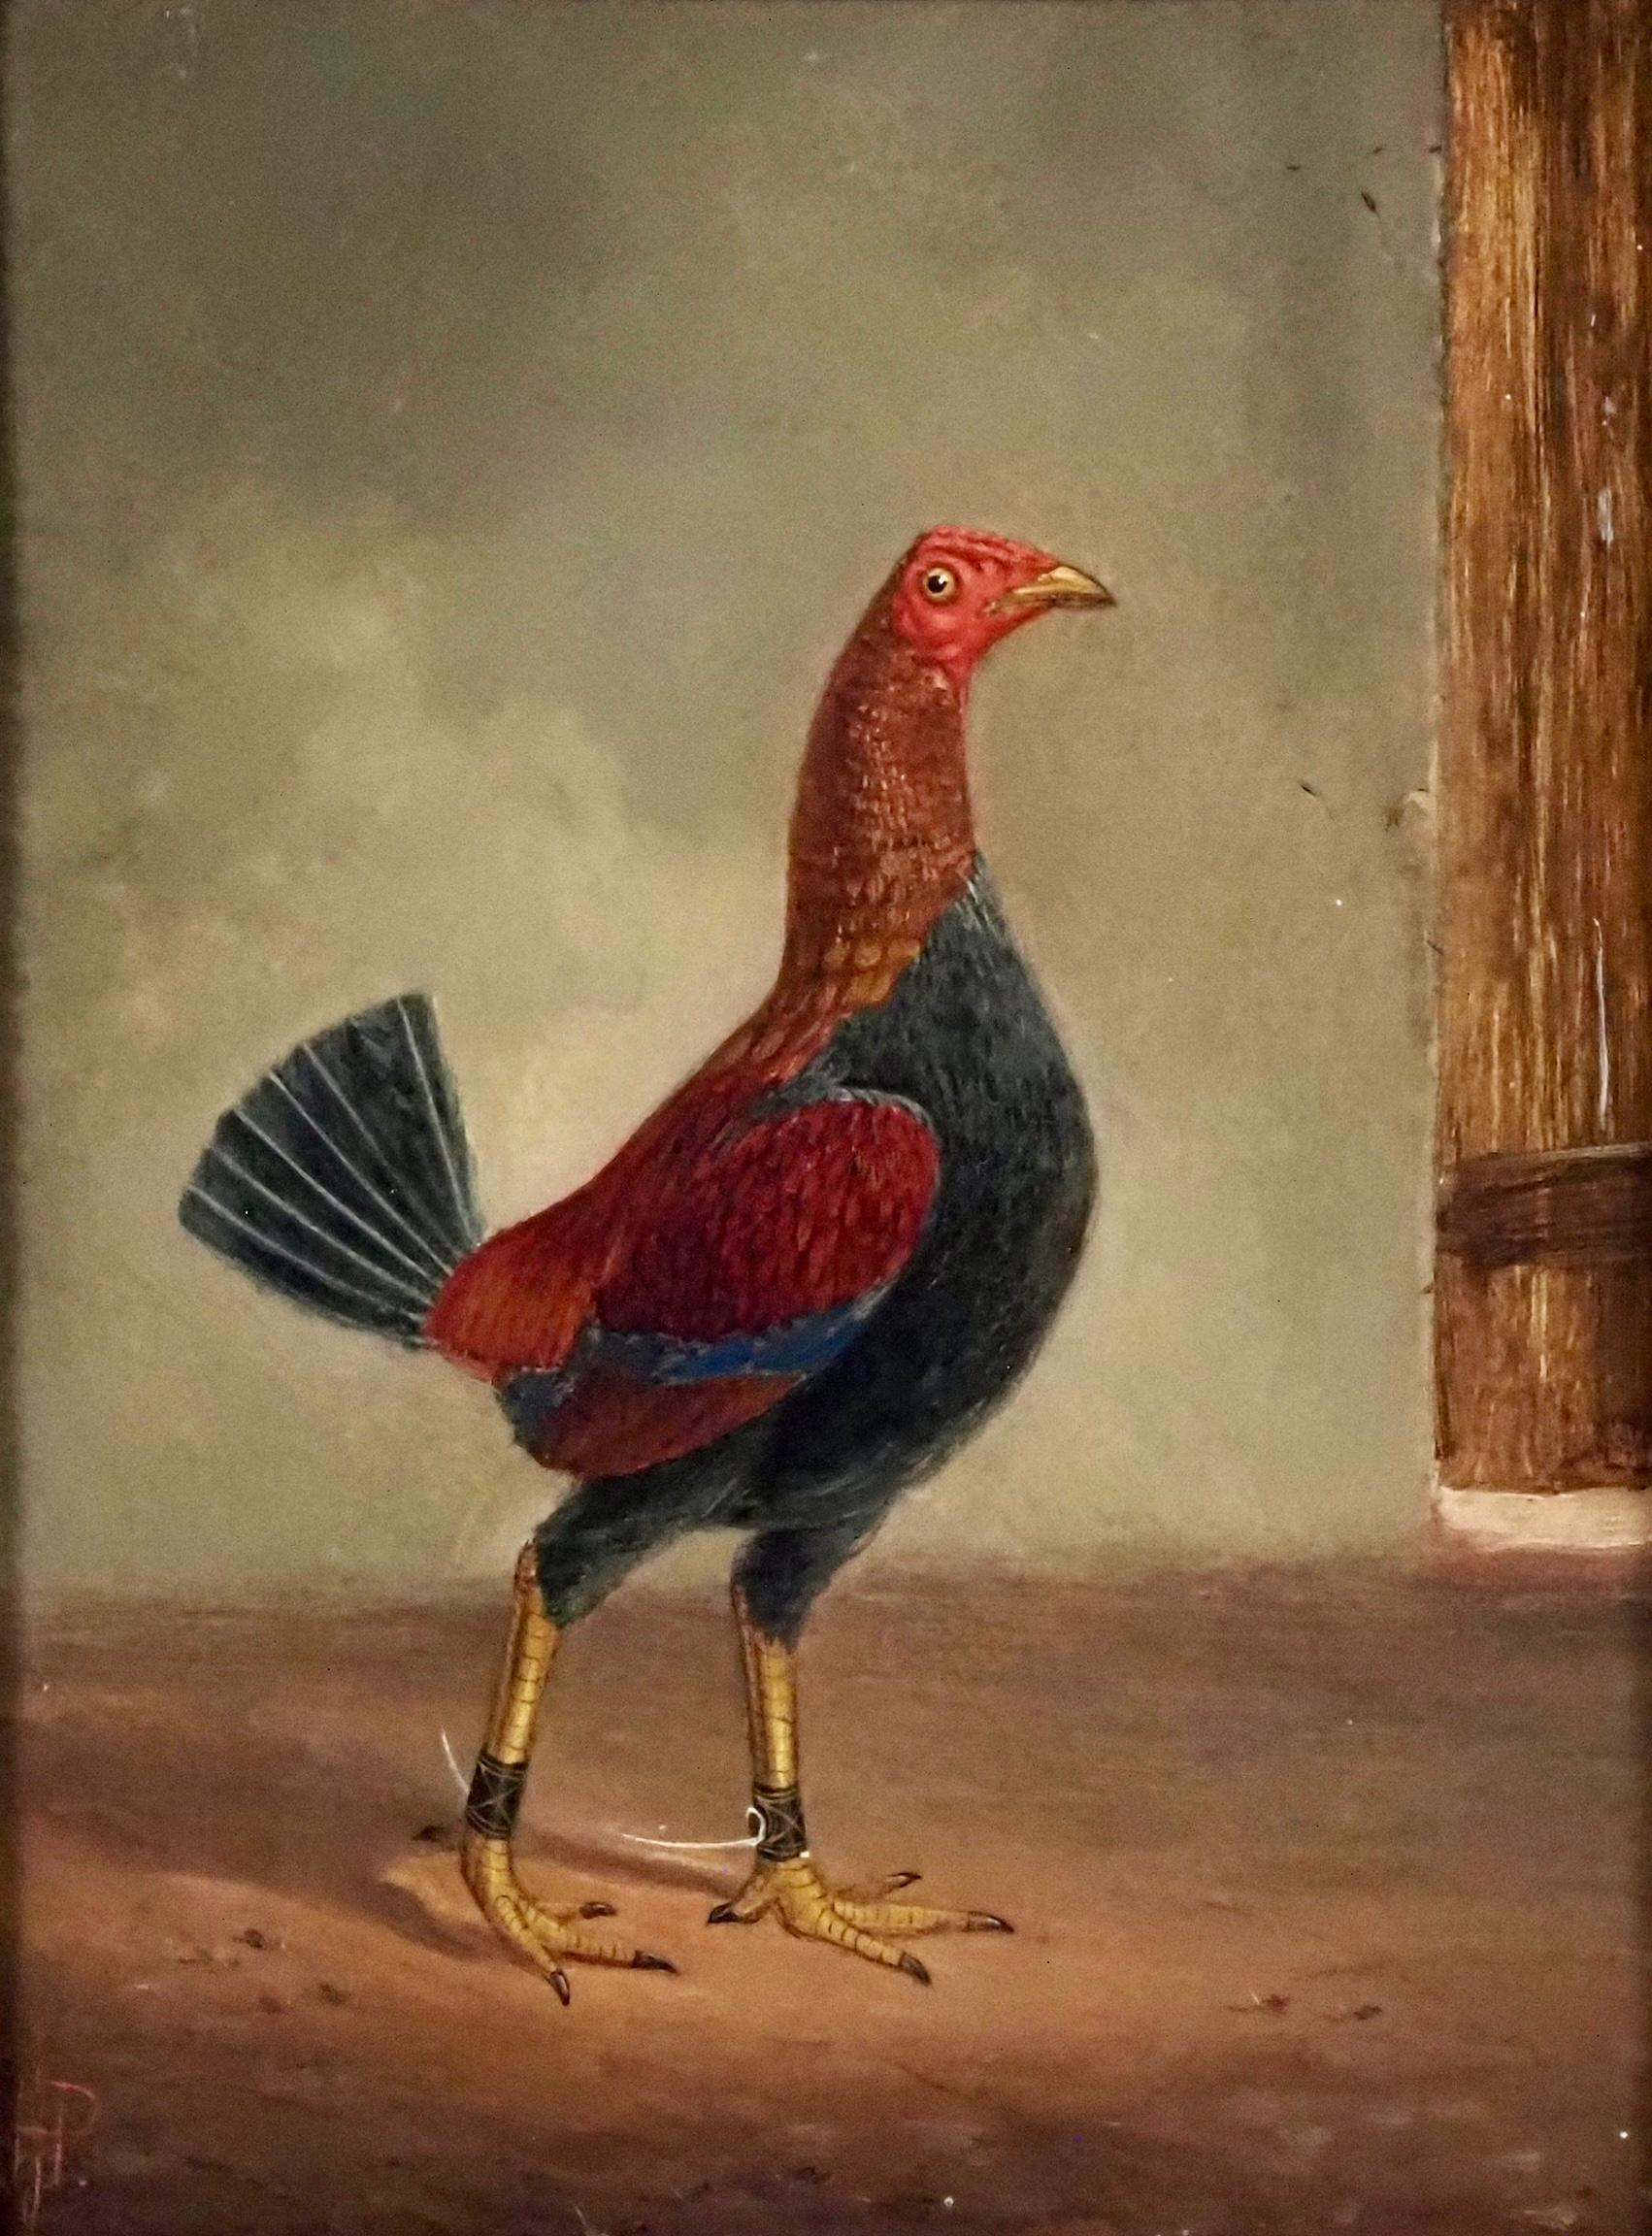 Hilton Lark Pratt (1838-1875)
A dark-breasted fighting cock facing right
A pale-breasted fighting cock facing left
Both signed with monogram
A pair, oil on Panel
Painting Size 11 3/4 x 8 3/4 in 

Pratt was born in the parish of St Peters in Derby on